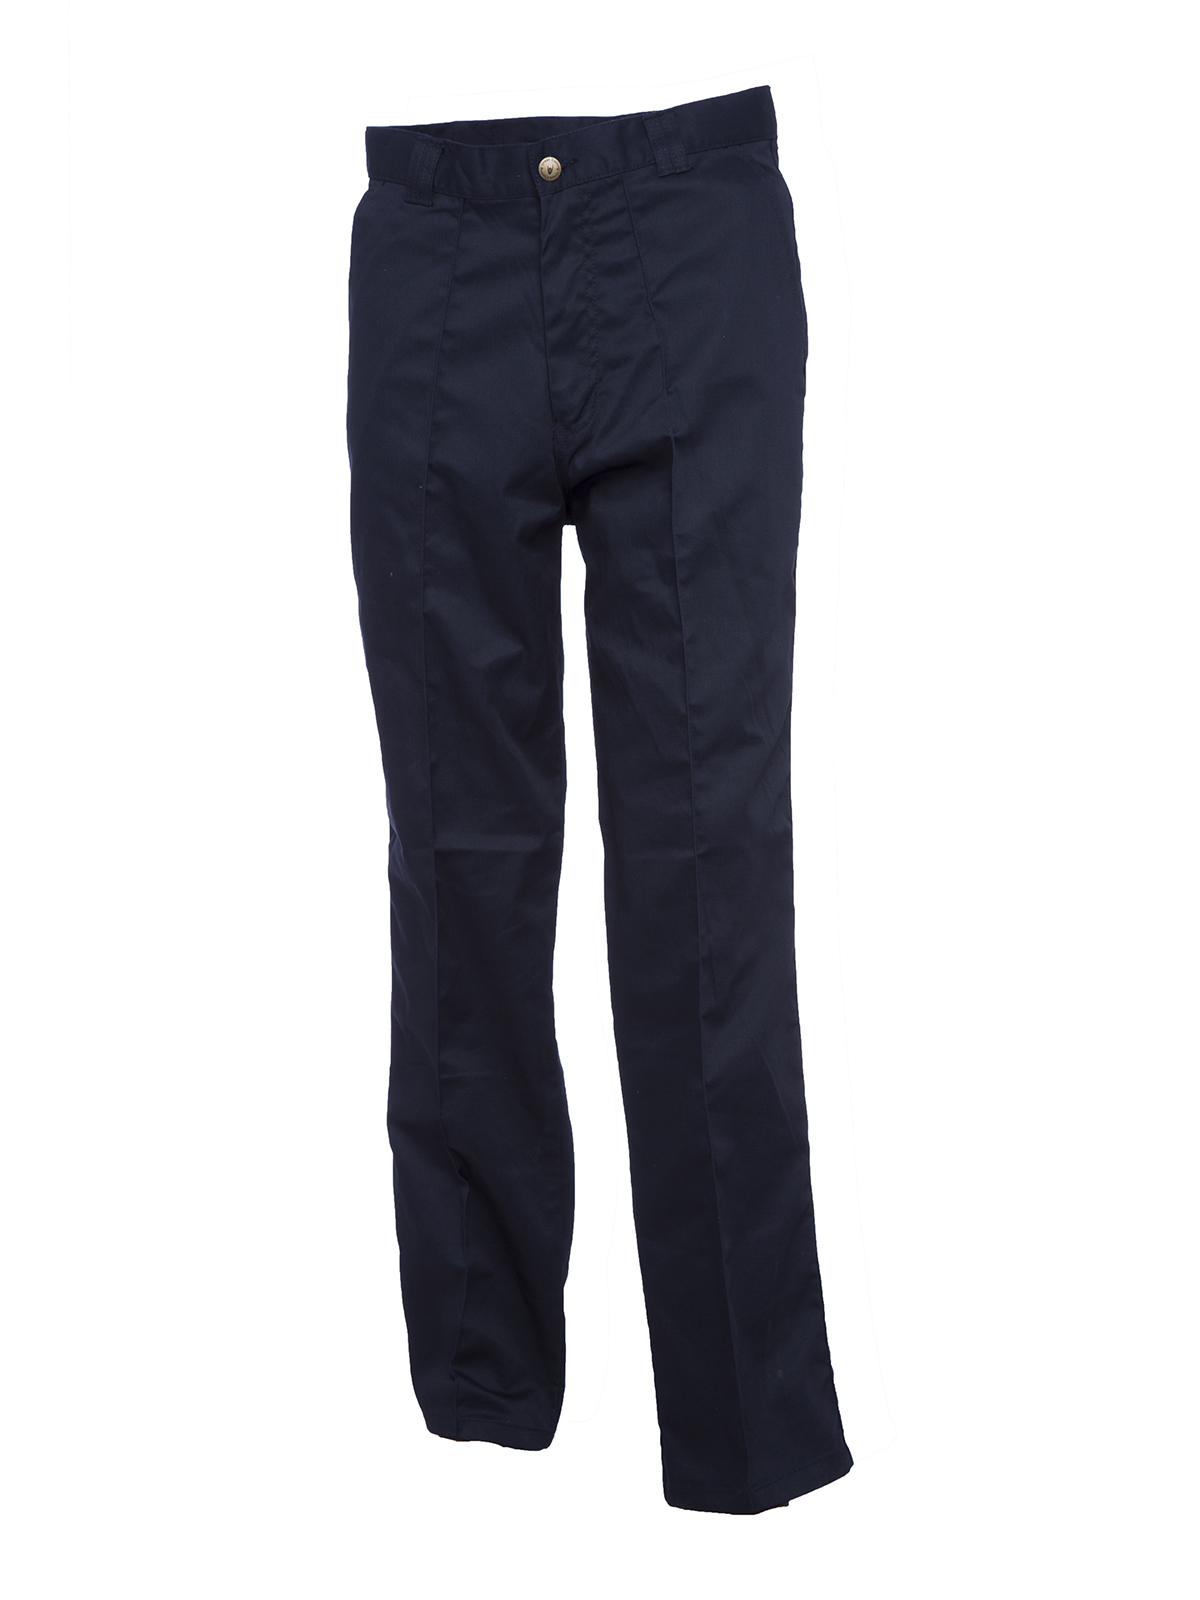 Workwear Trousers, Navy Blue - 30R